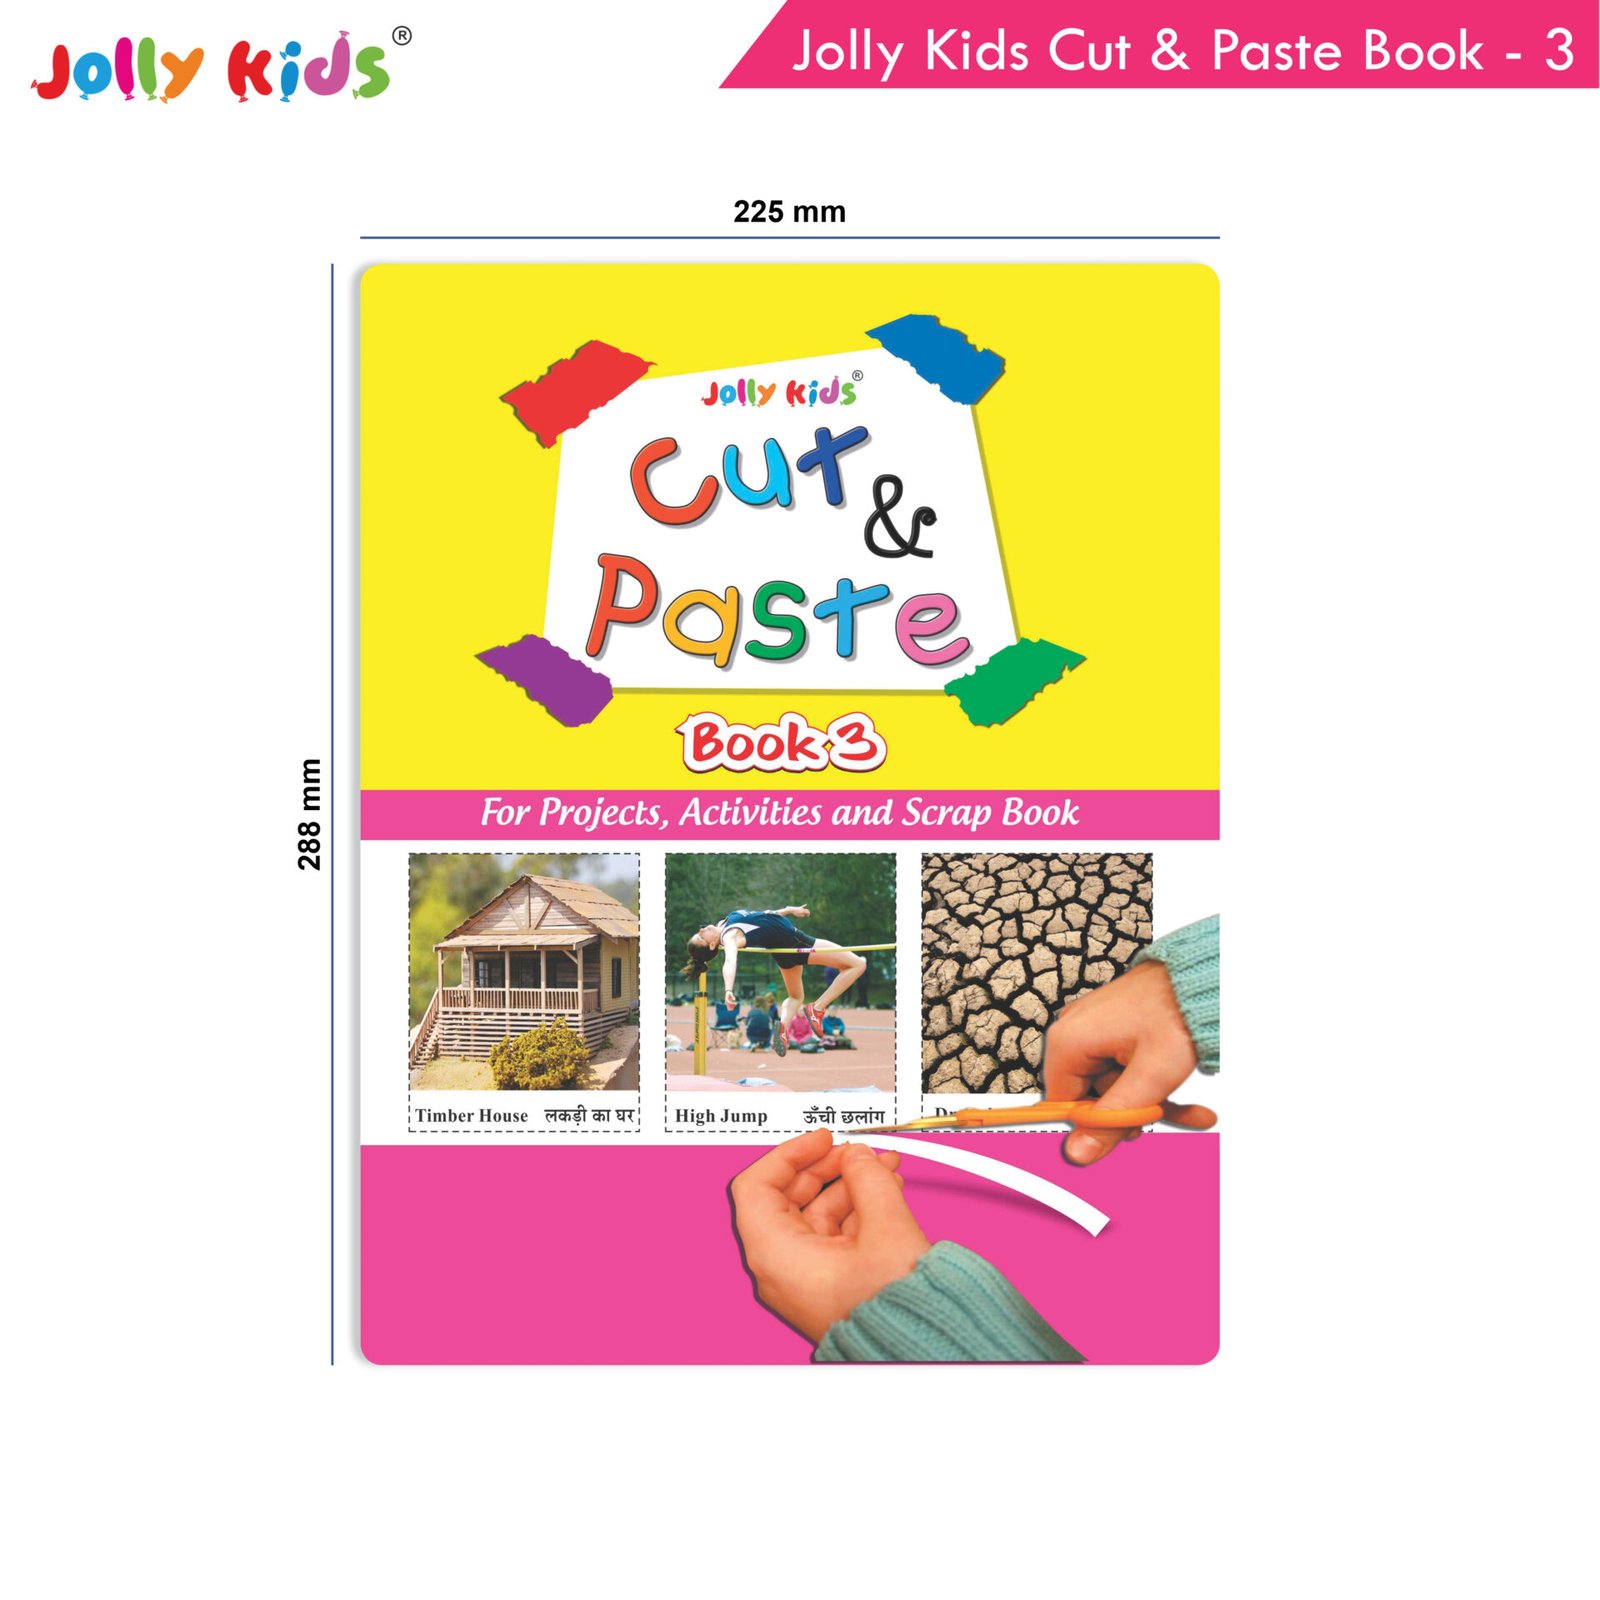 Jolly Kids Cut and Paste Book 3 2